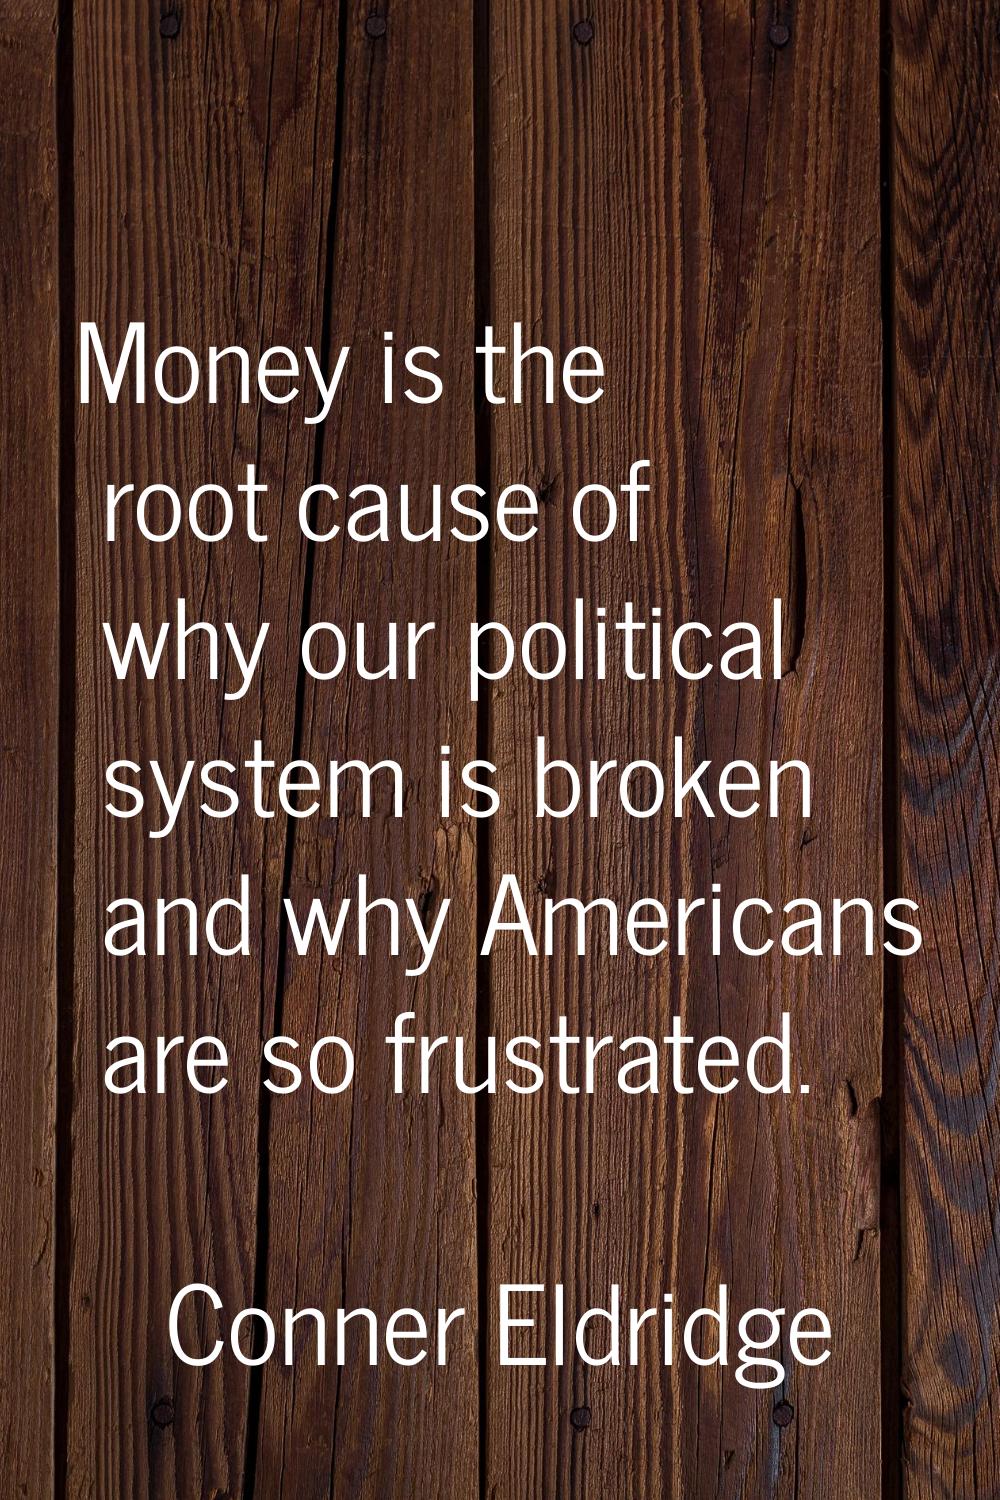 Money is the root cause of why our political system is broken and why Americans are so frustrated.